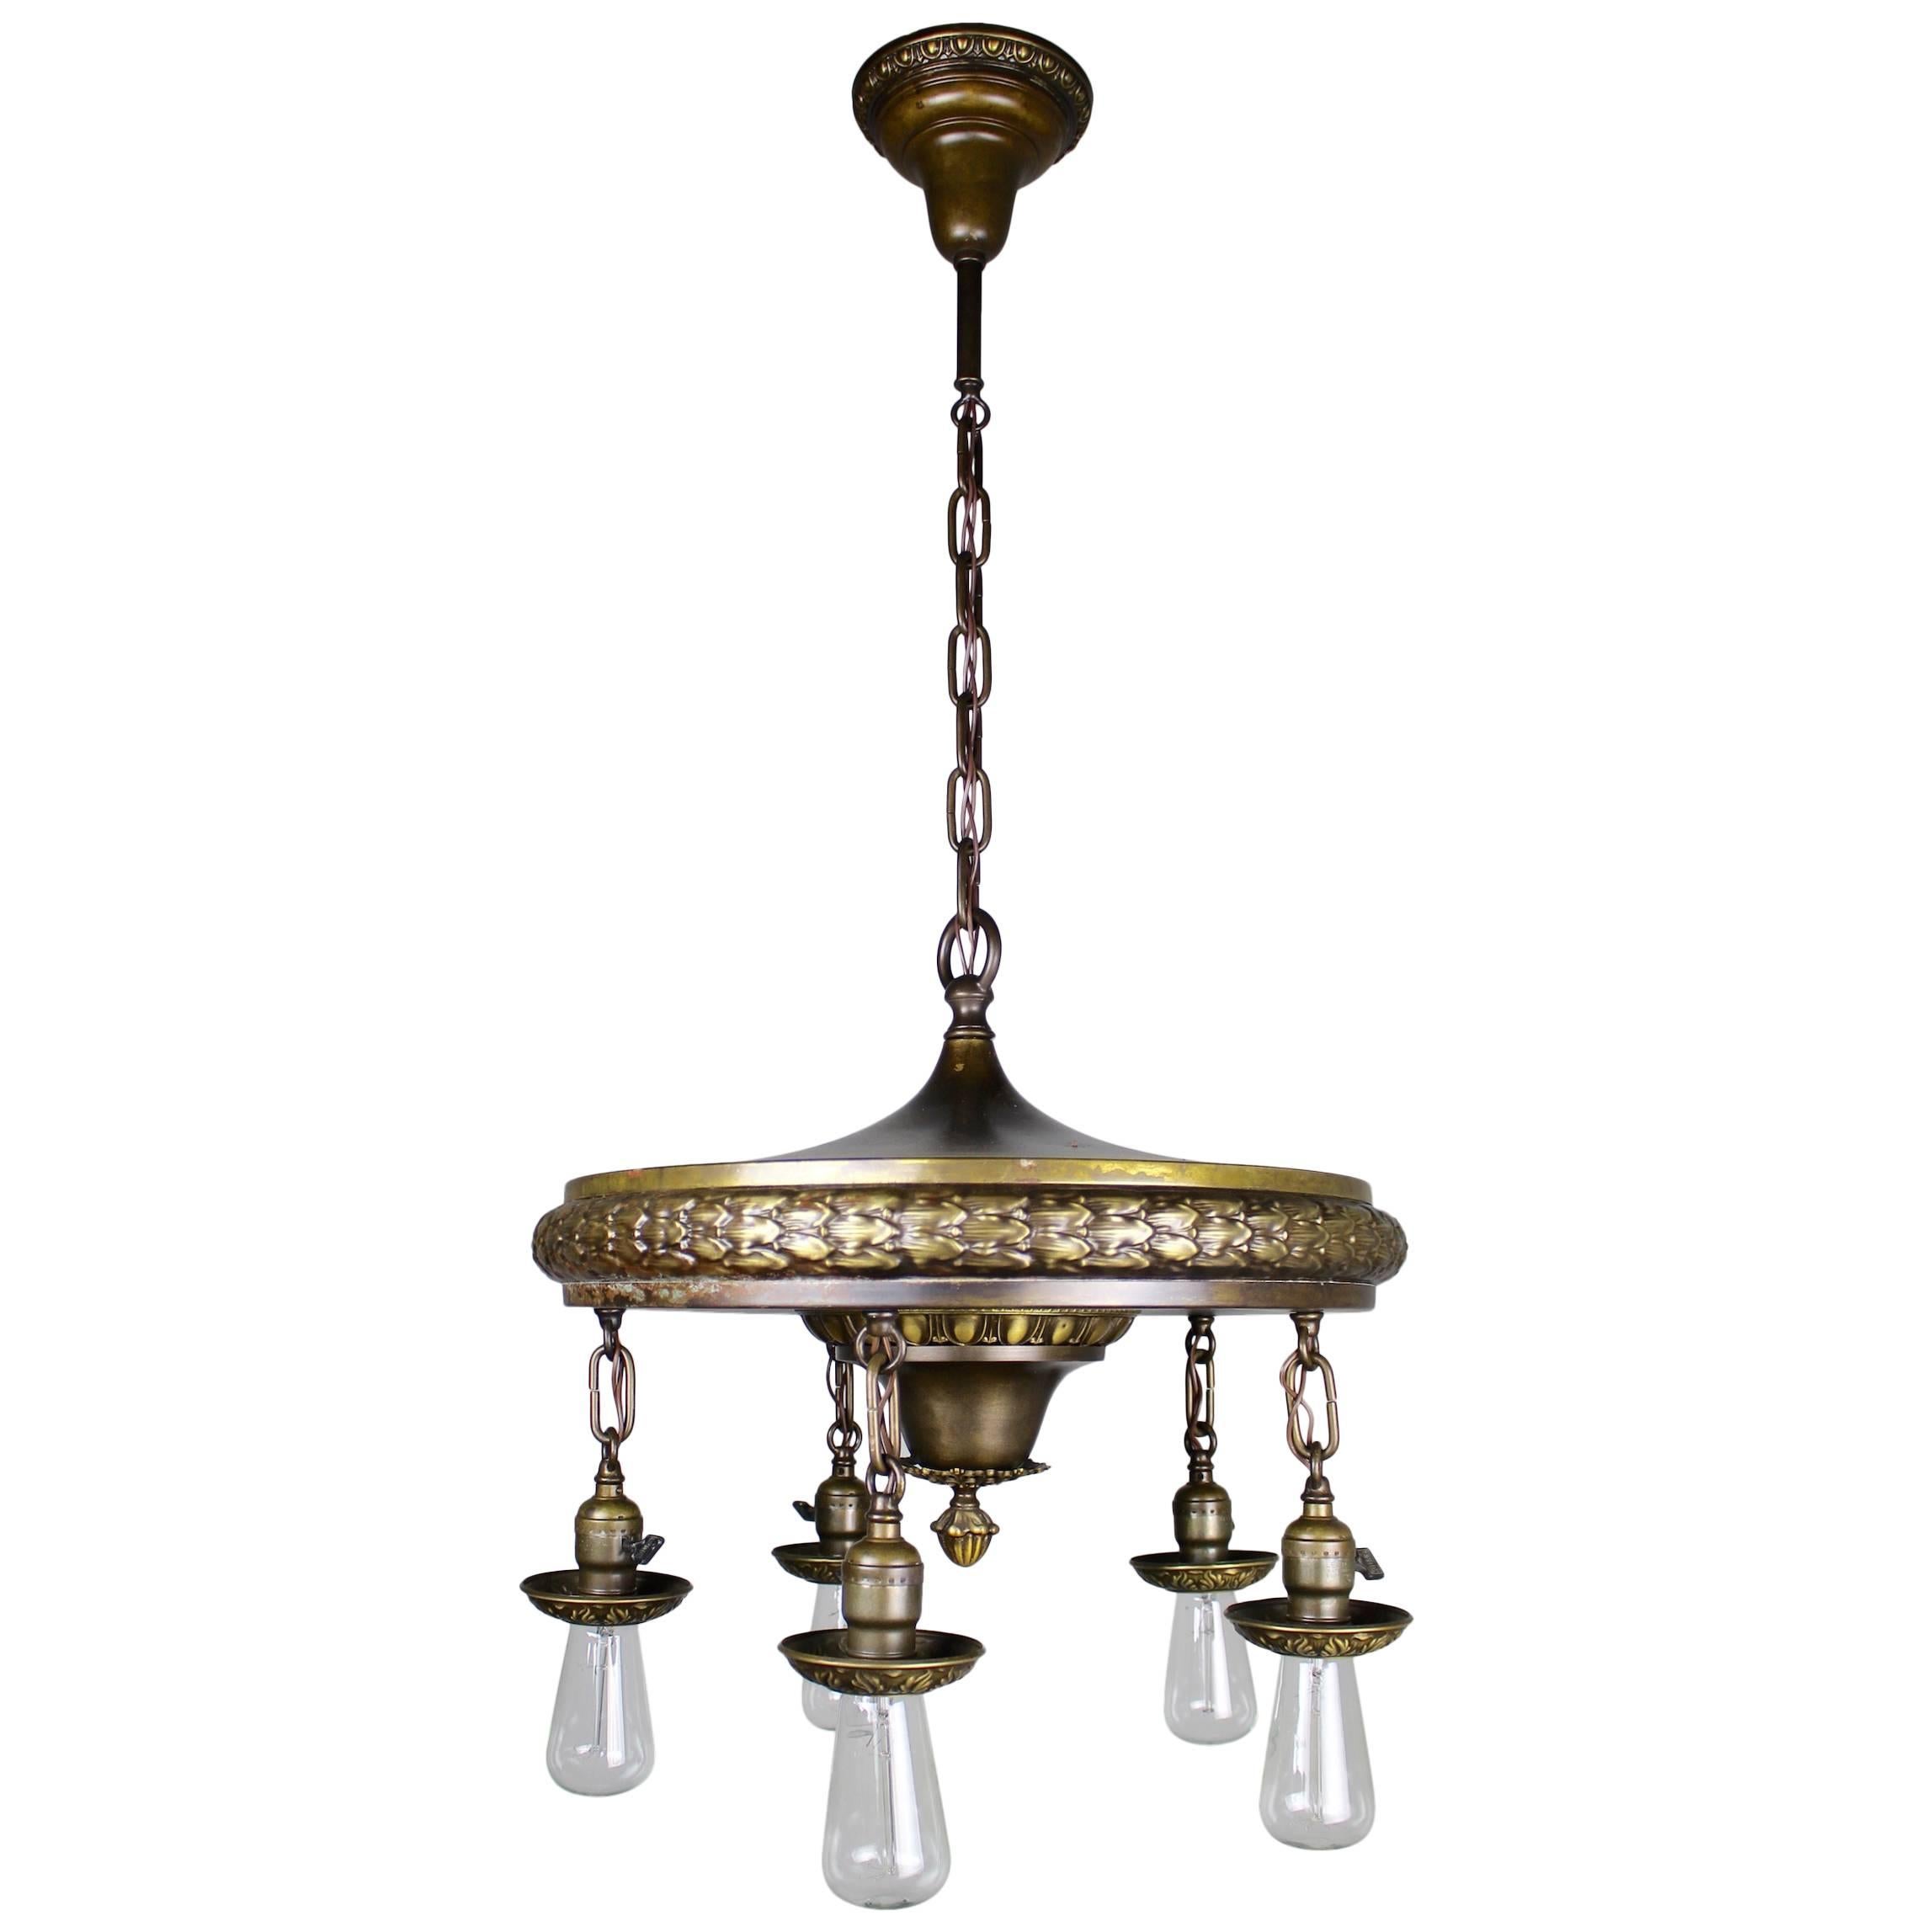 1920s Five-Light Neoclassical Revival Dining Room Fixture For Sale